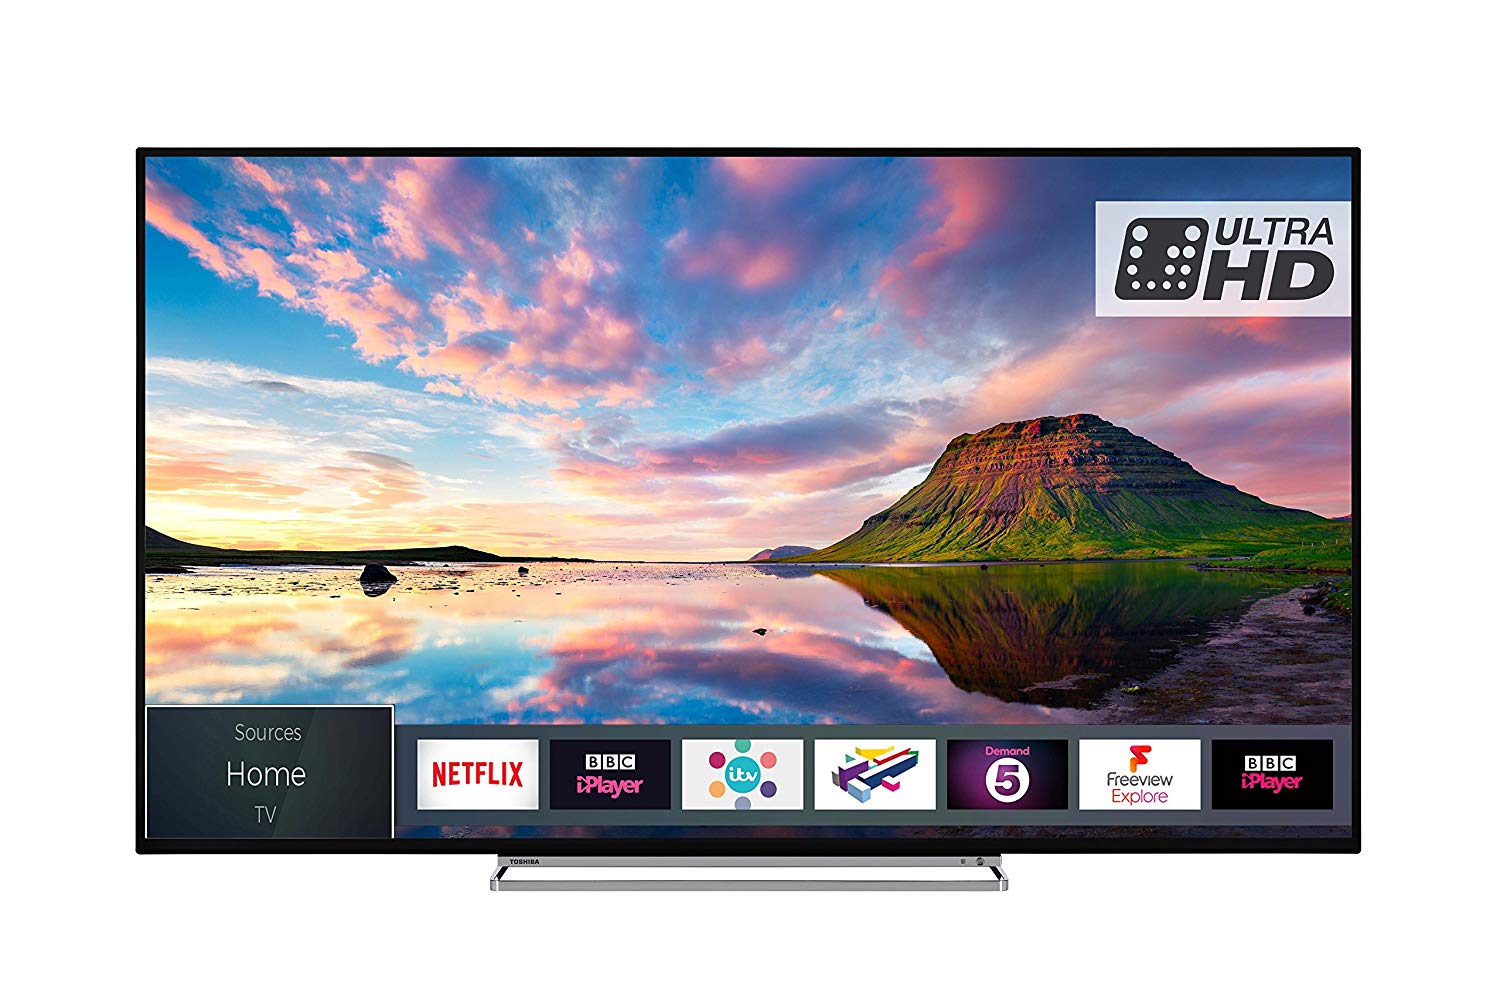 Buying a New TV in 2021 – What to Look Out For